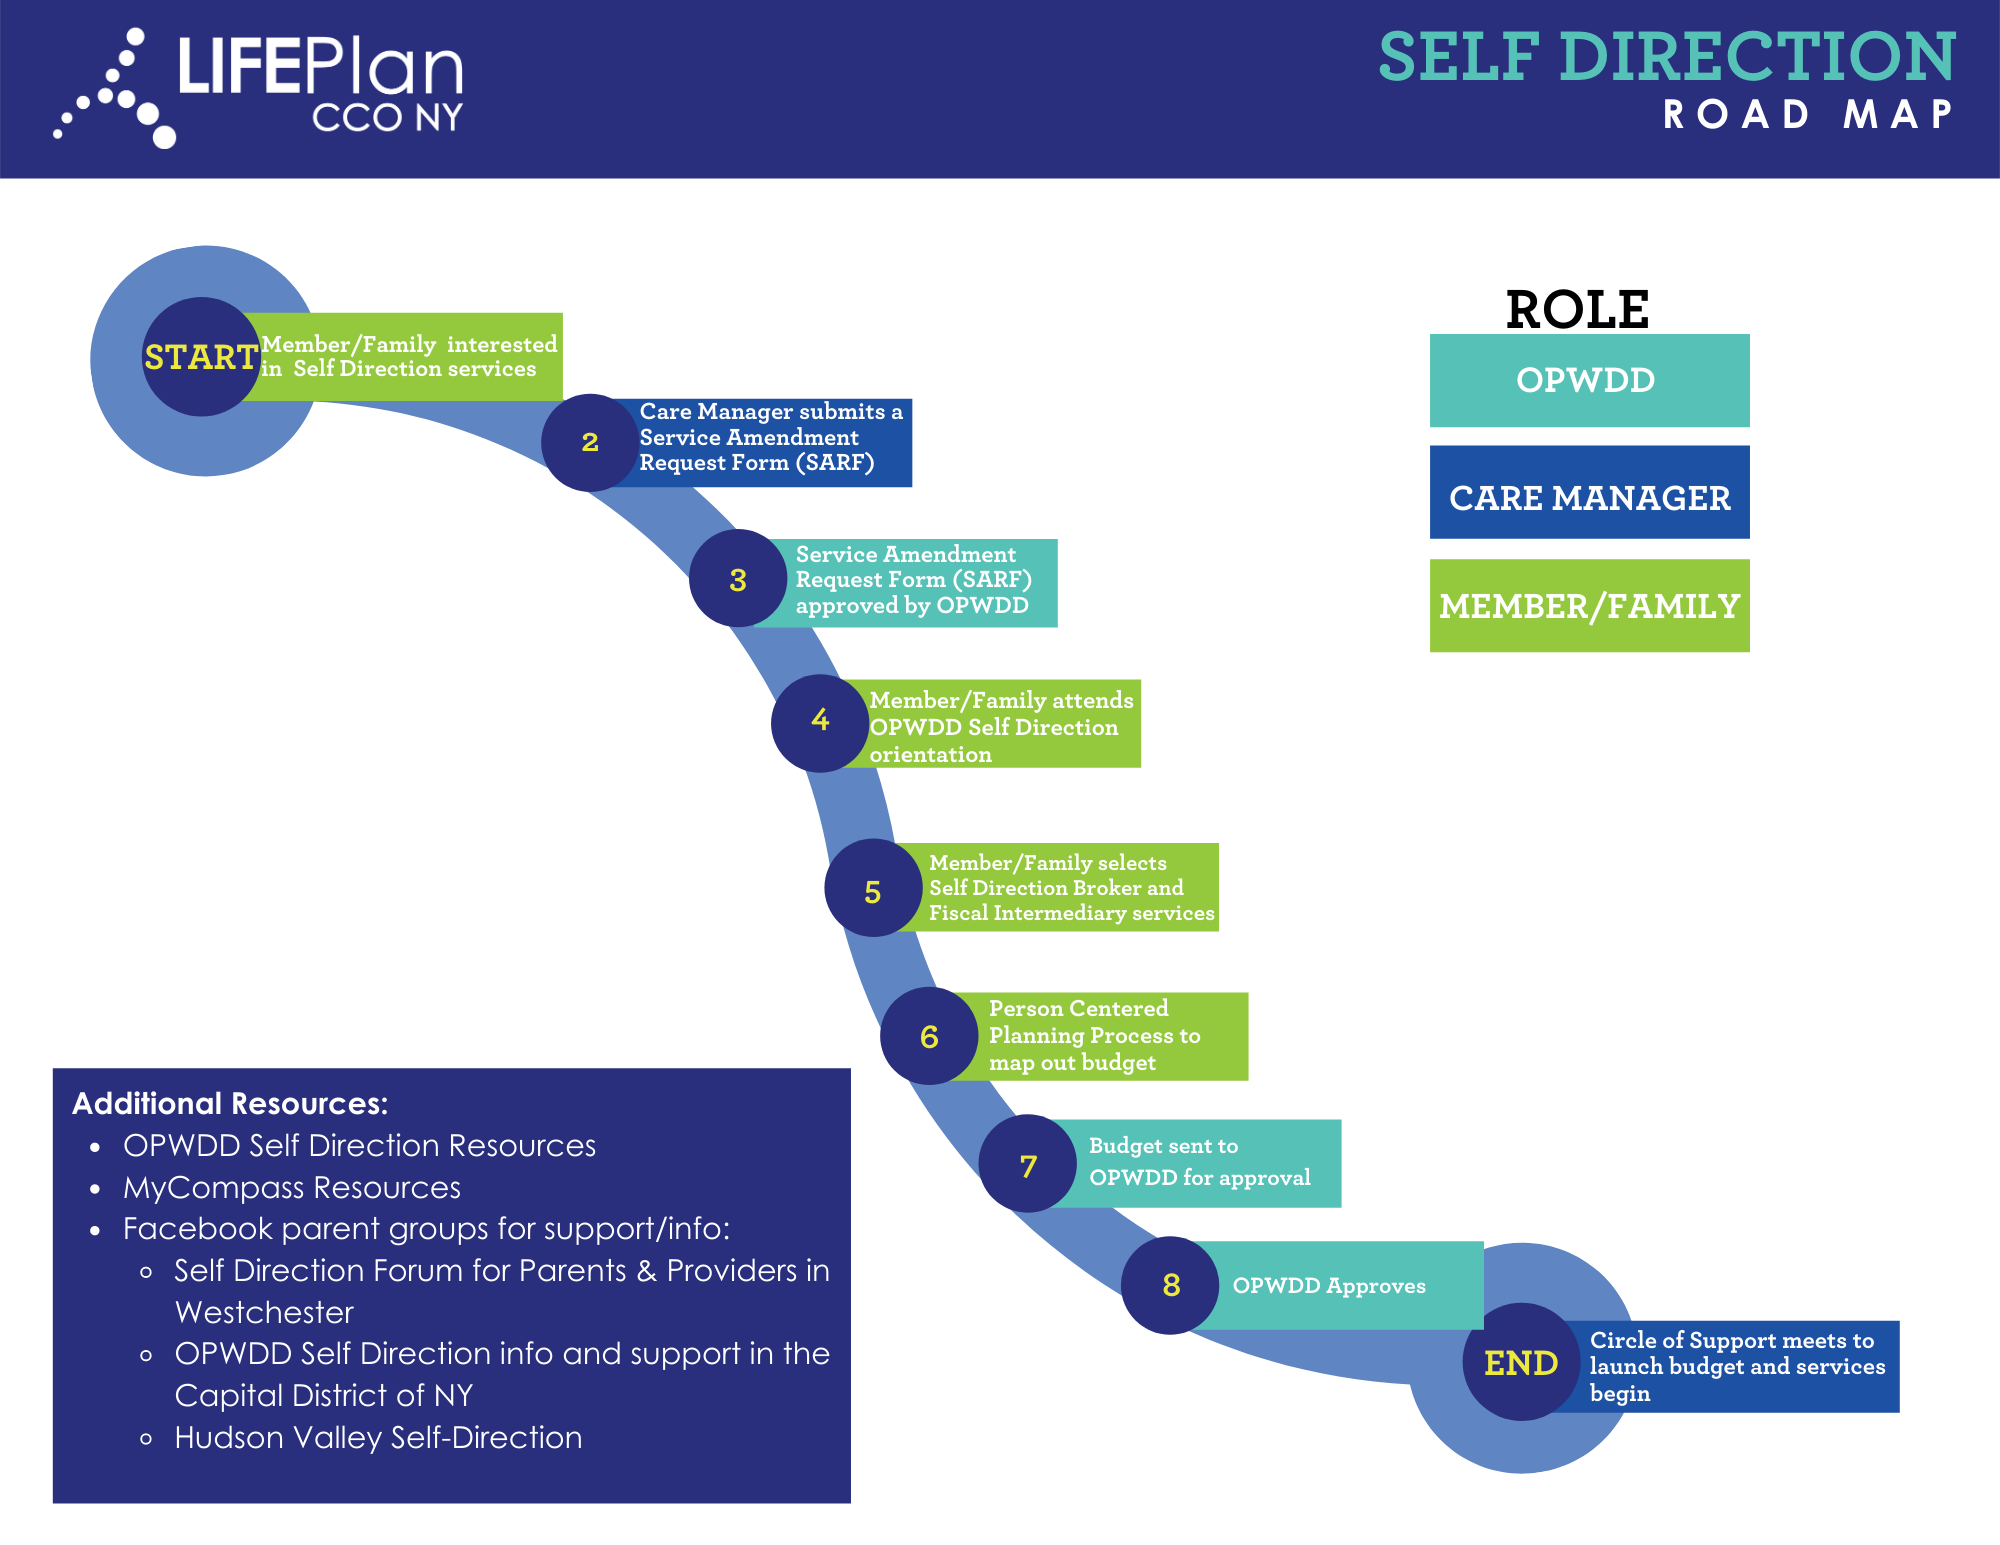 Self-Direction Road Map